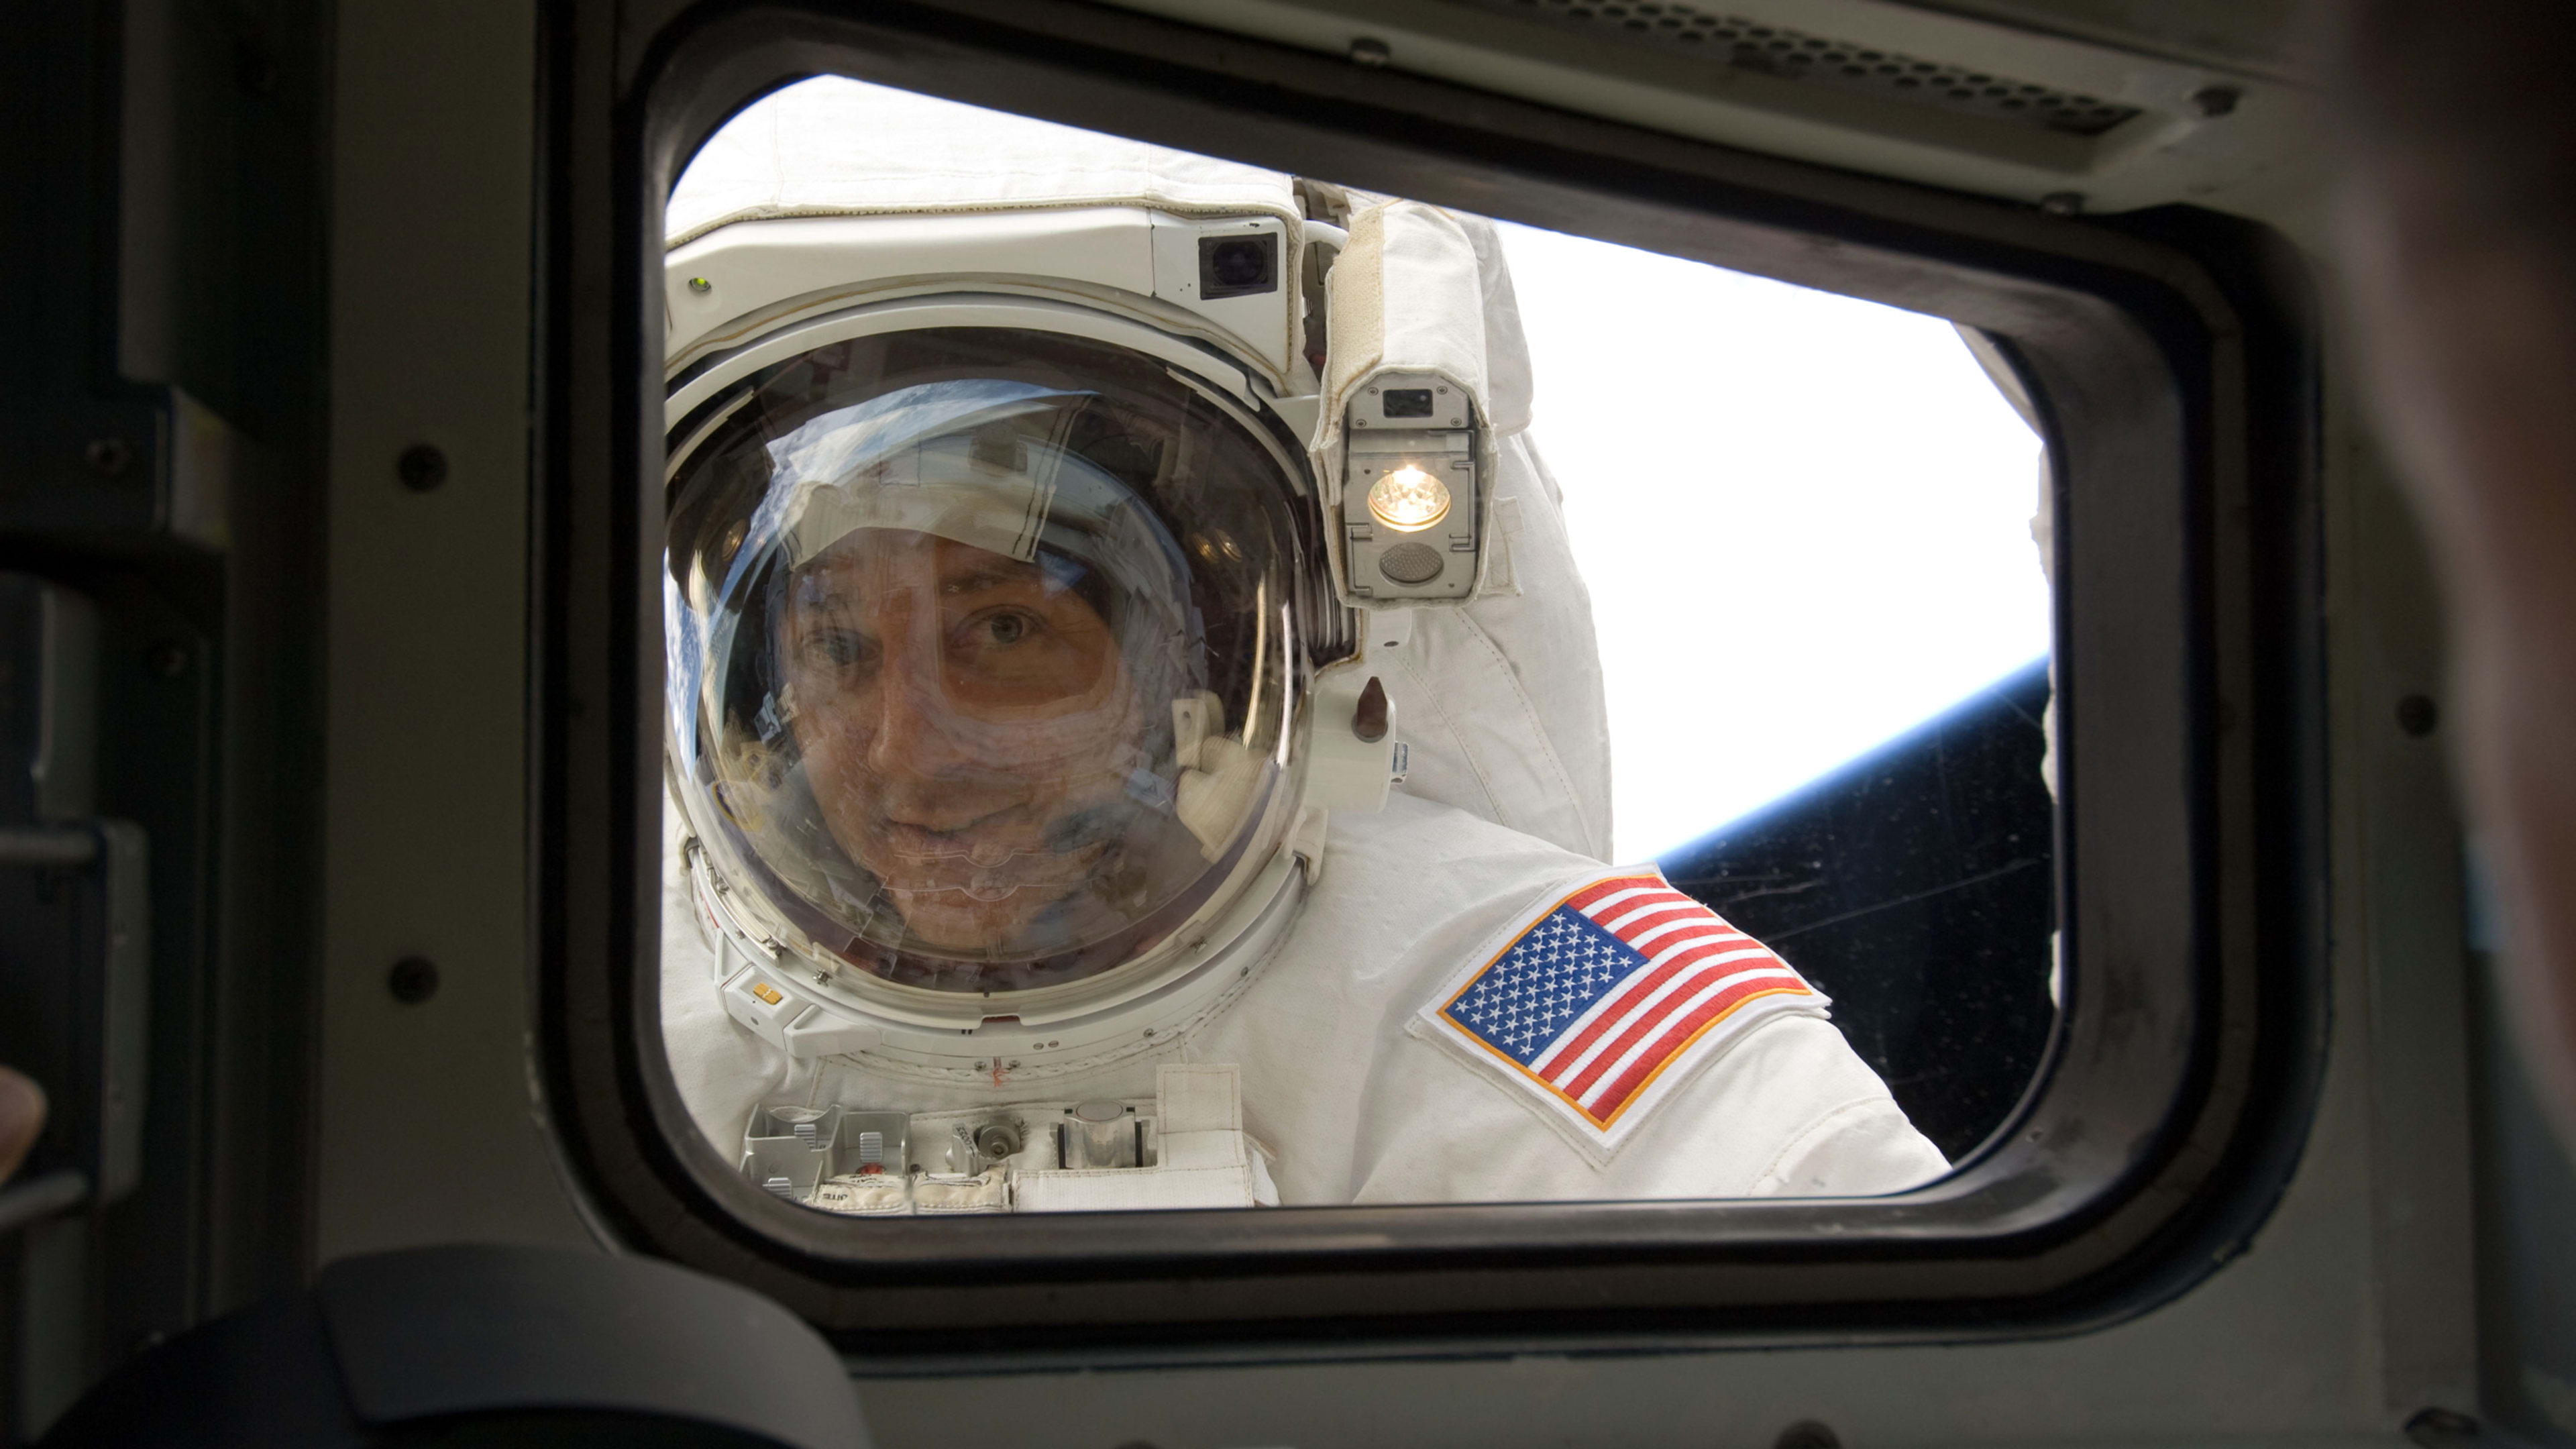 An astronaut shares his 30-second trick for boosting productivity